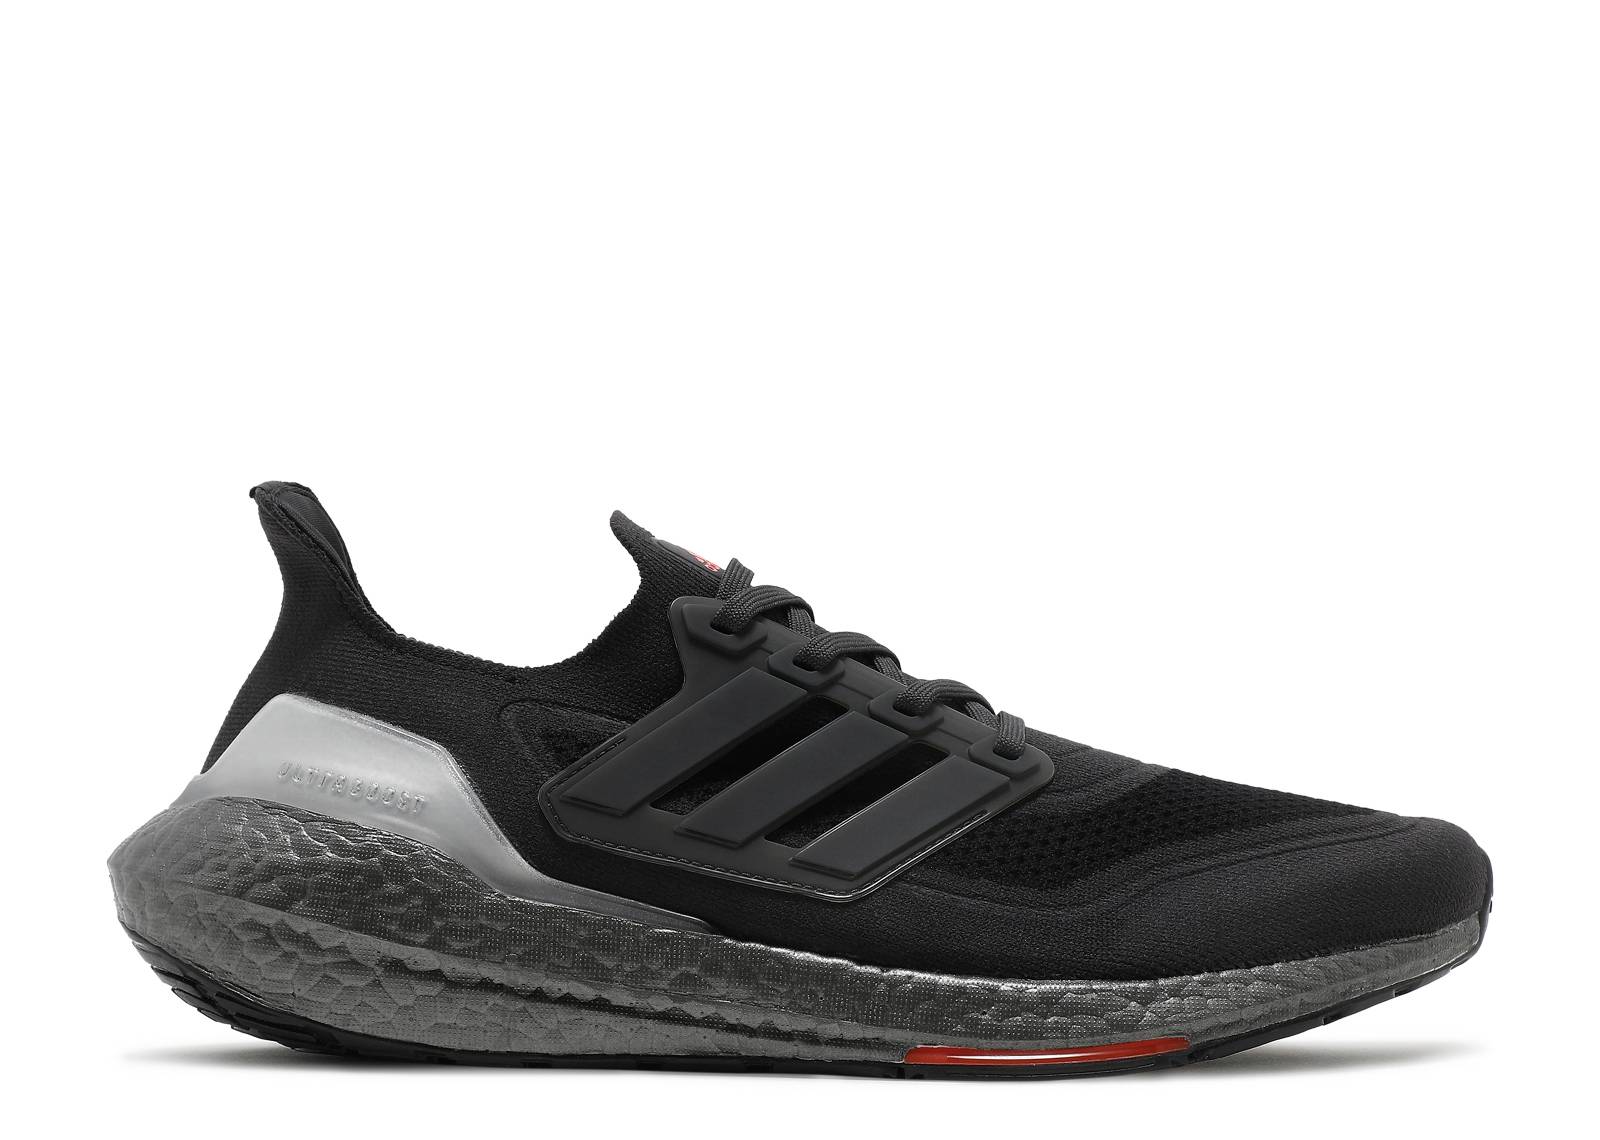 UltraBoost 21 'Carbon Solar Red'